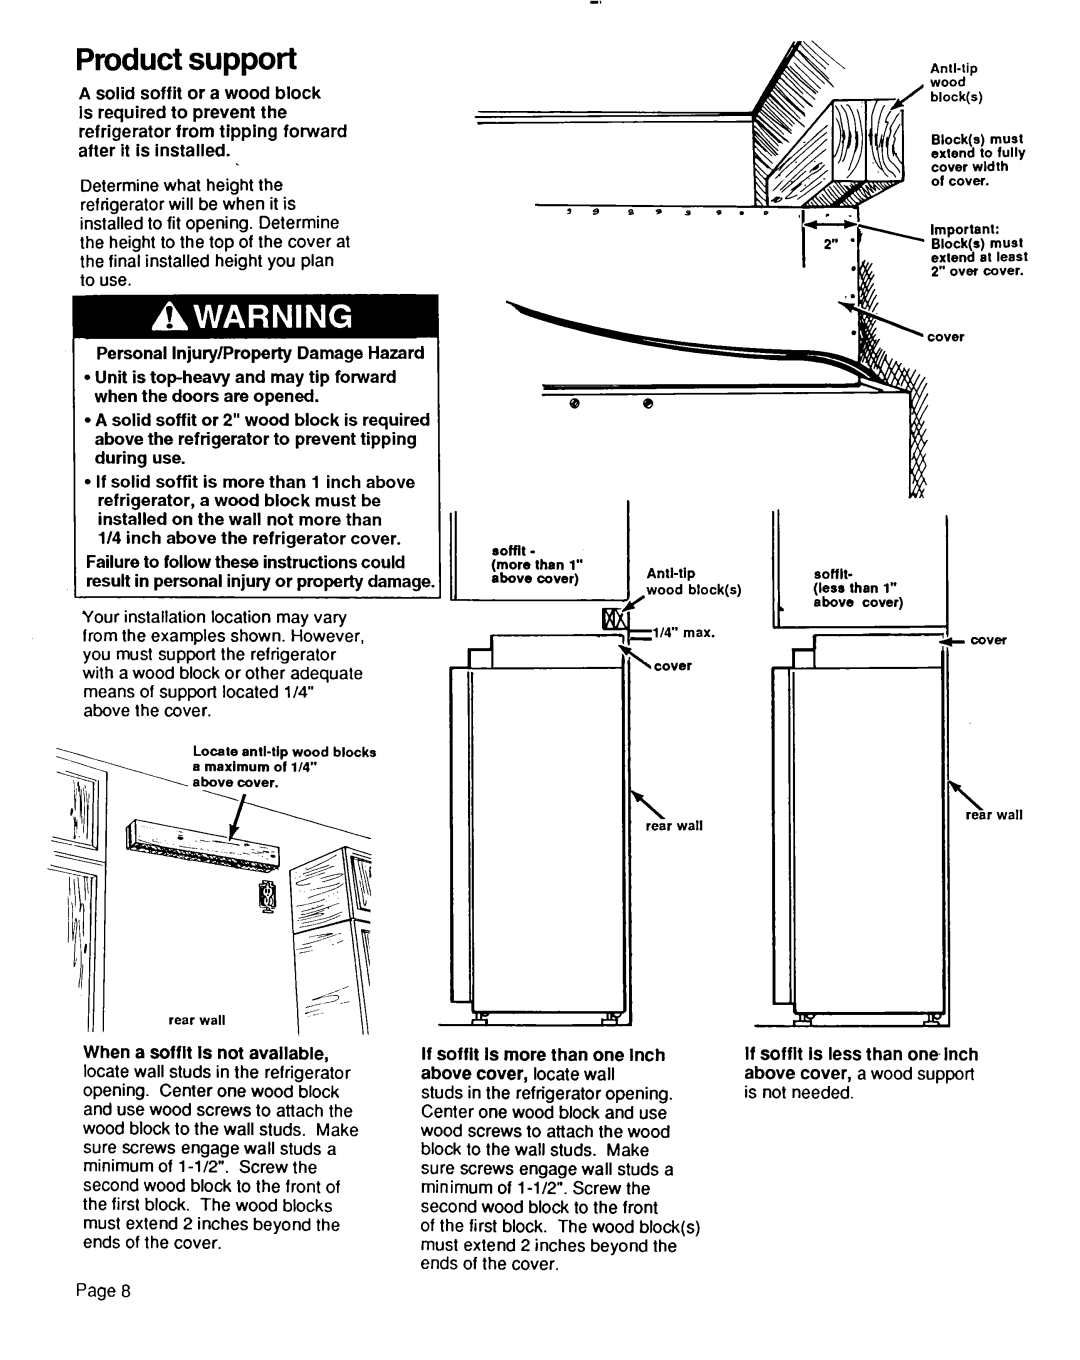 KitchenAid S-302 installation instructions Product support 